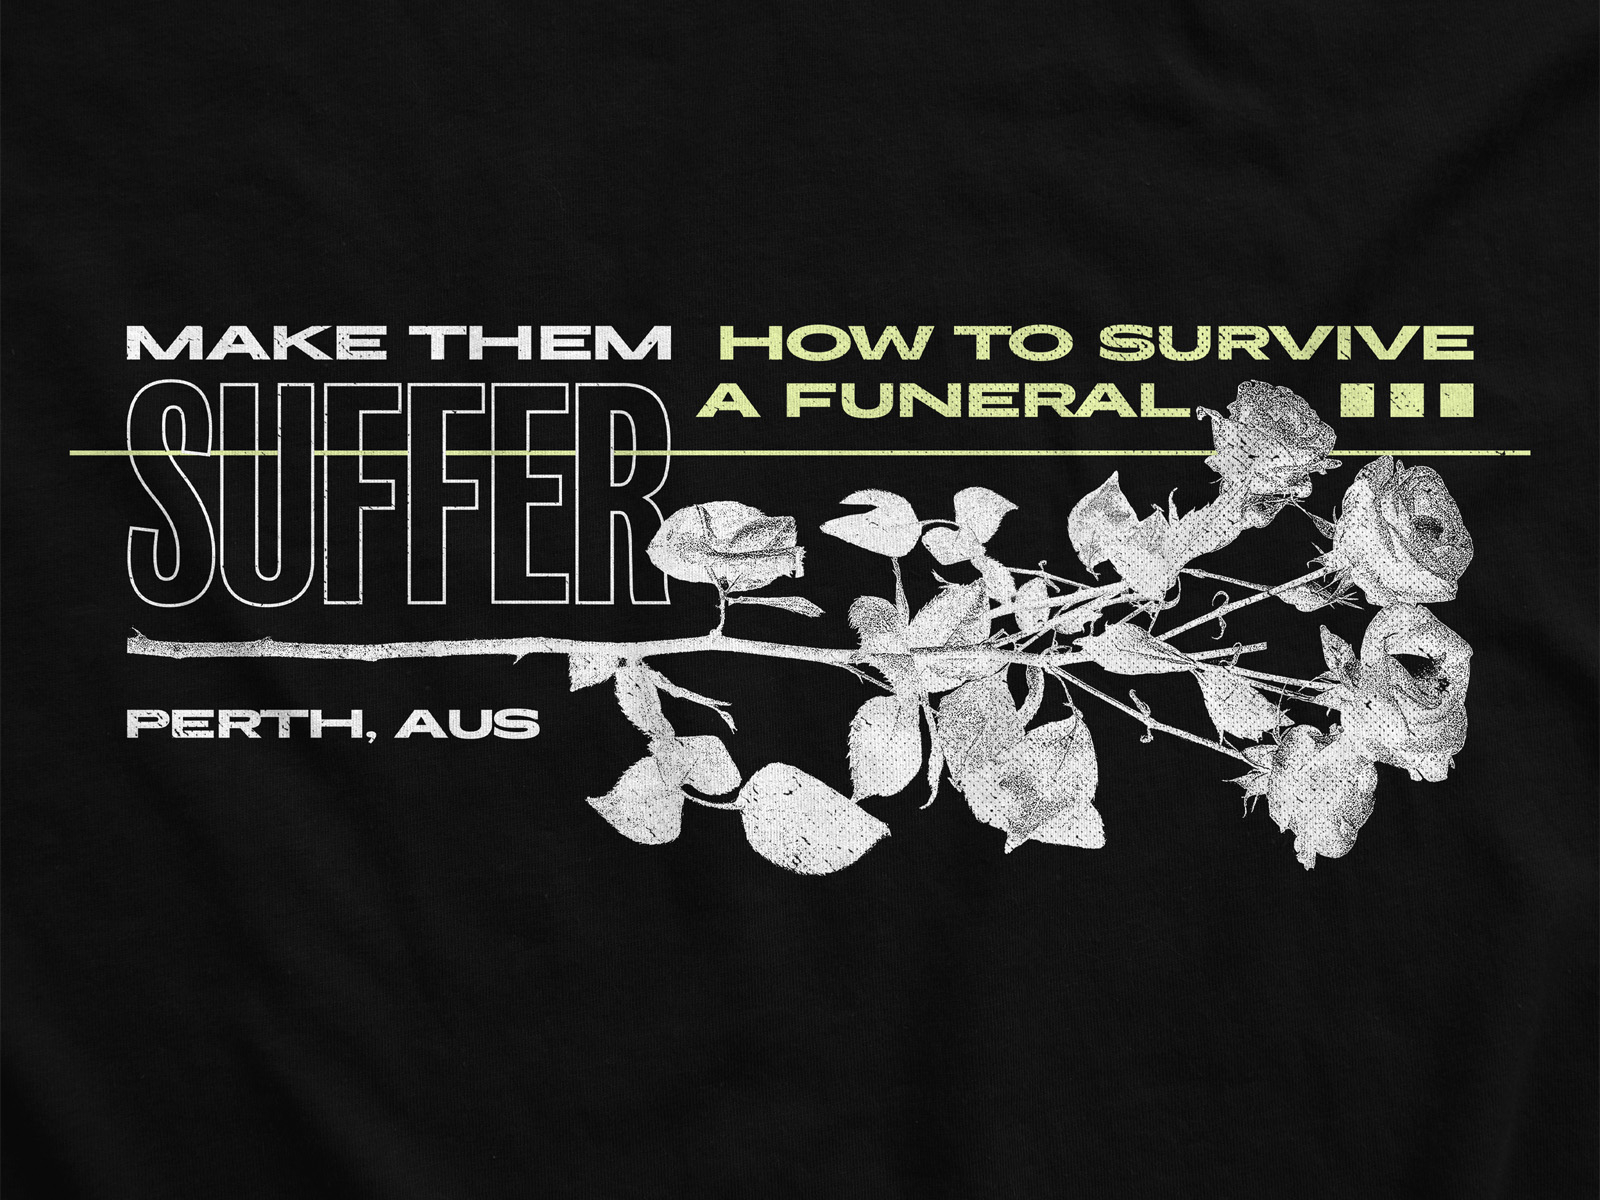 How to Survive a Funeral by Alexander Buhaj on Dribbble